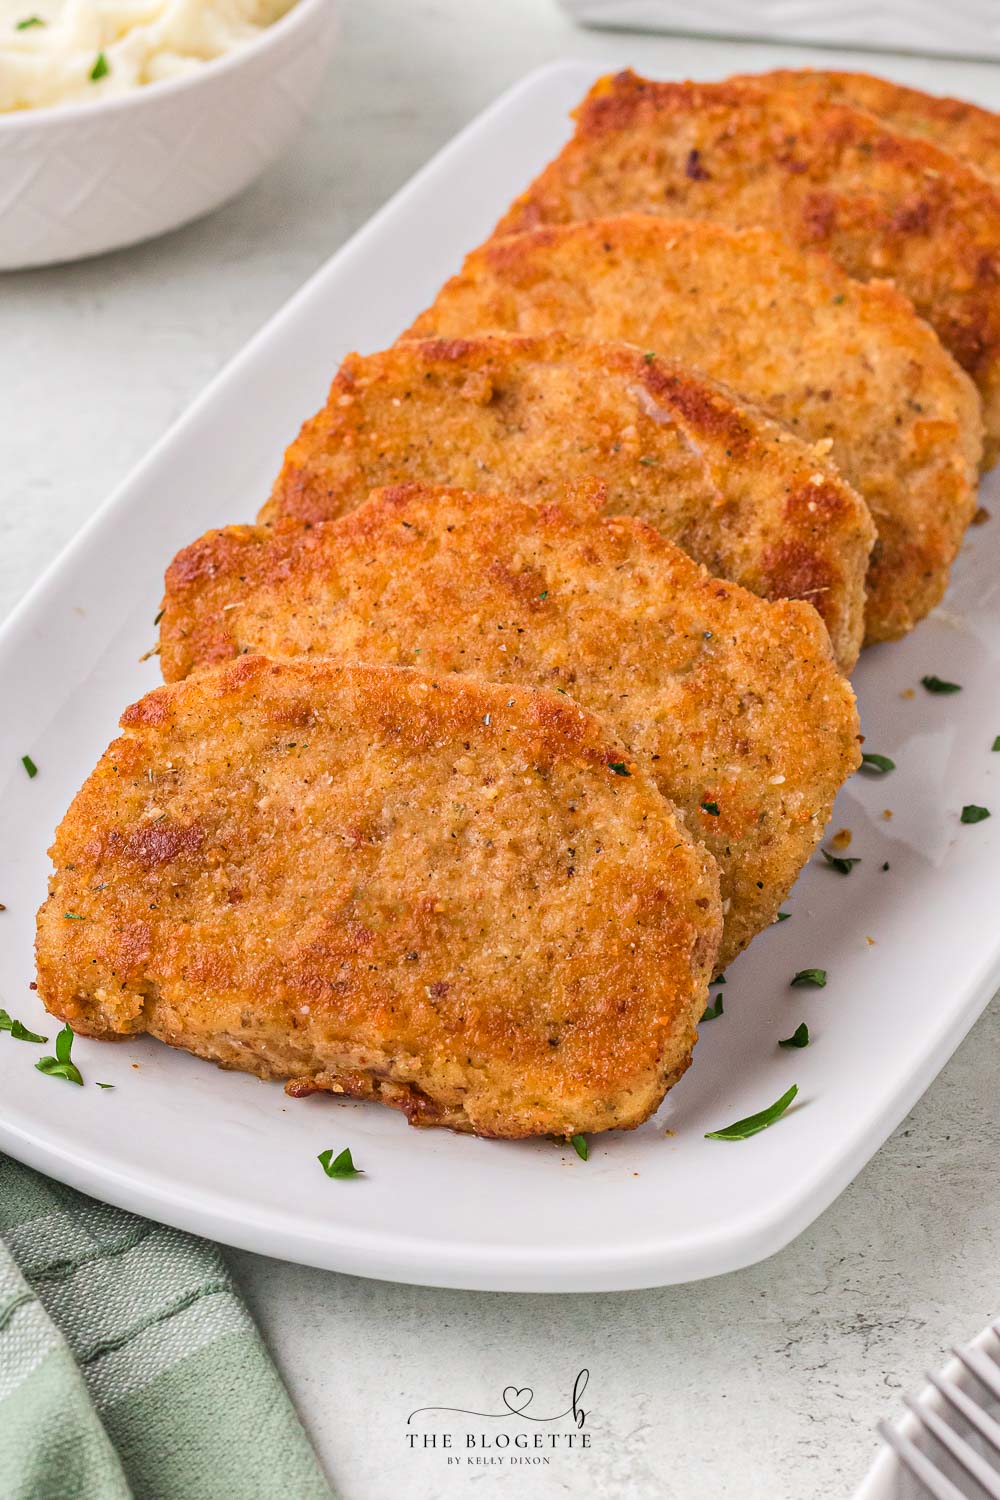 Breaded Fried Pork Chops cooked to crispy perfection! Golden brown boneless pork chops are crispy on the outside and juicy on the inside.